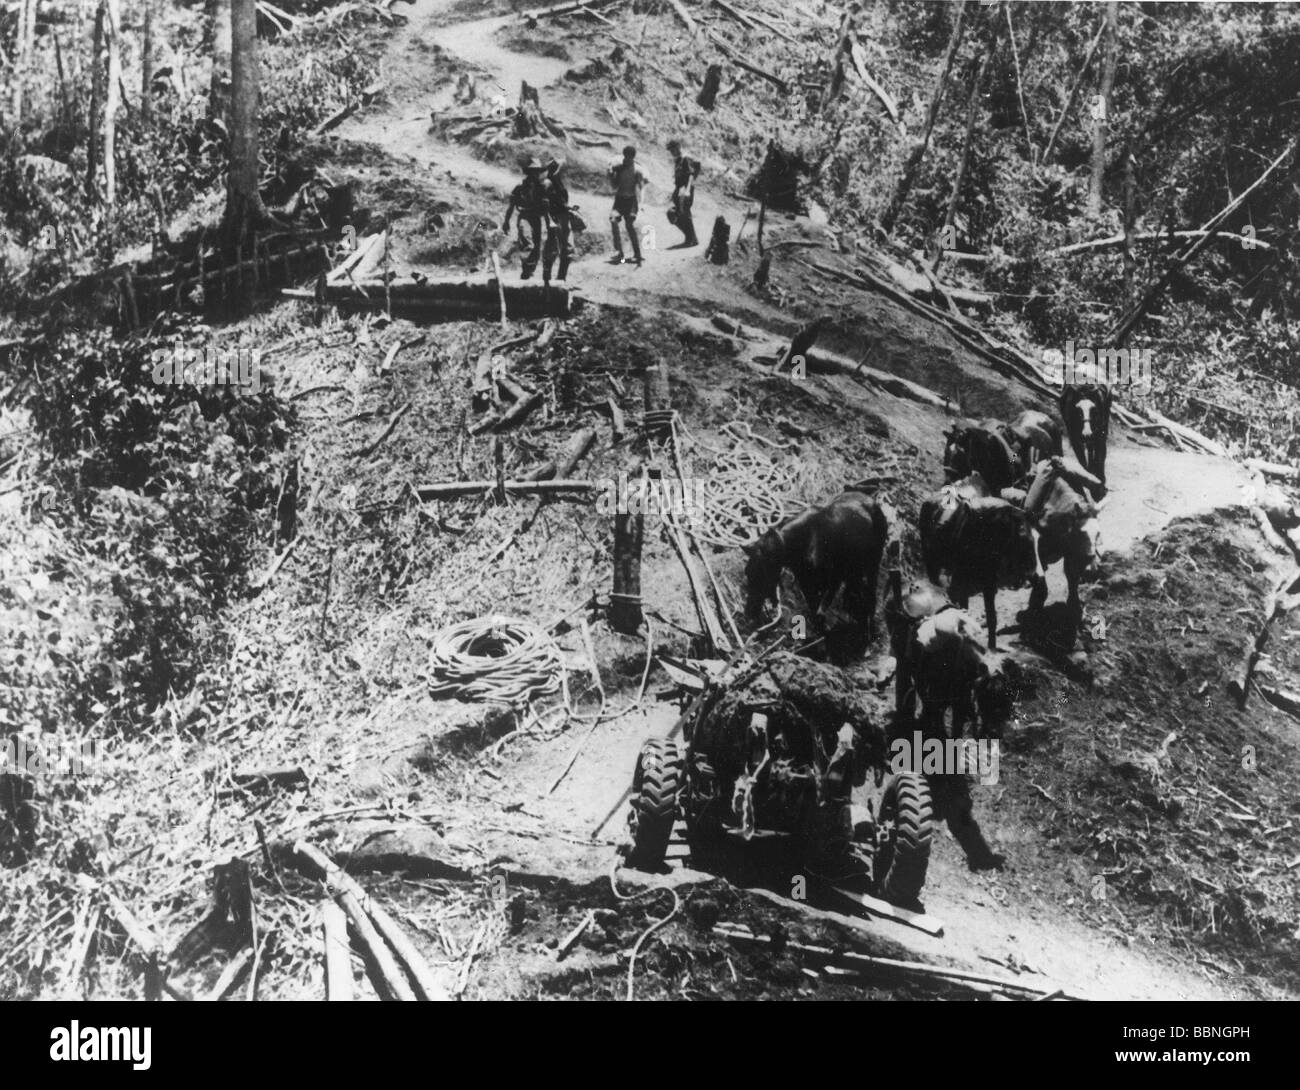 events, Second World War / WWII, Pacific, New Guinea, Australian soldiers of the 7th Division bringing 25 pounder guns with horses over the Owen Stanley Ridge, Papua, late 1942, Stock Photo